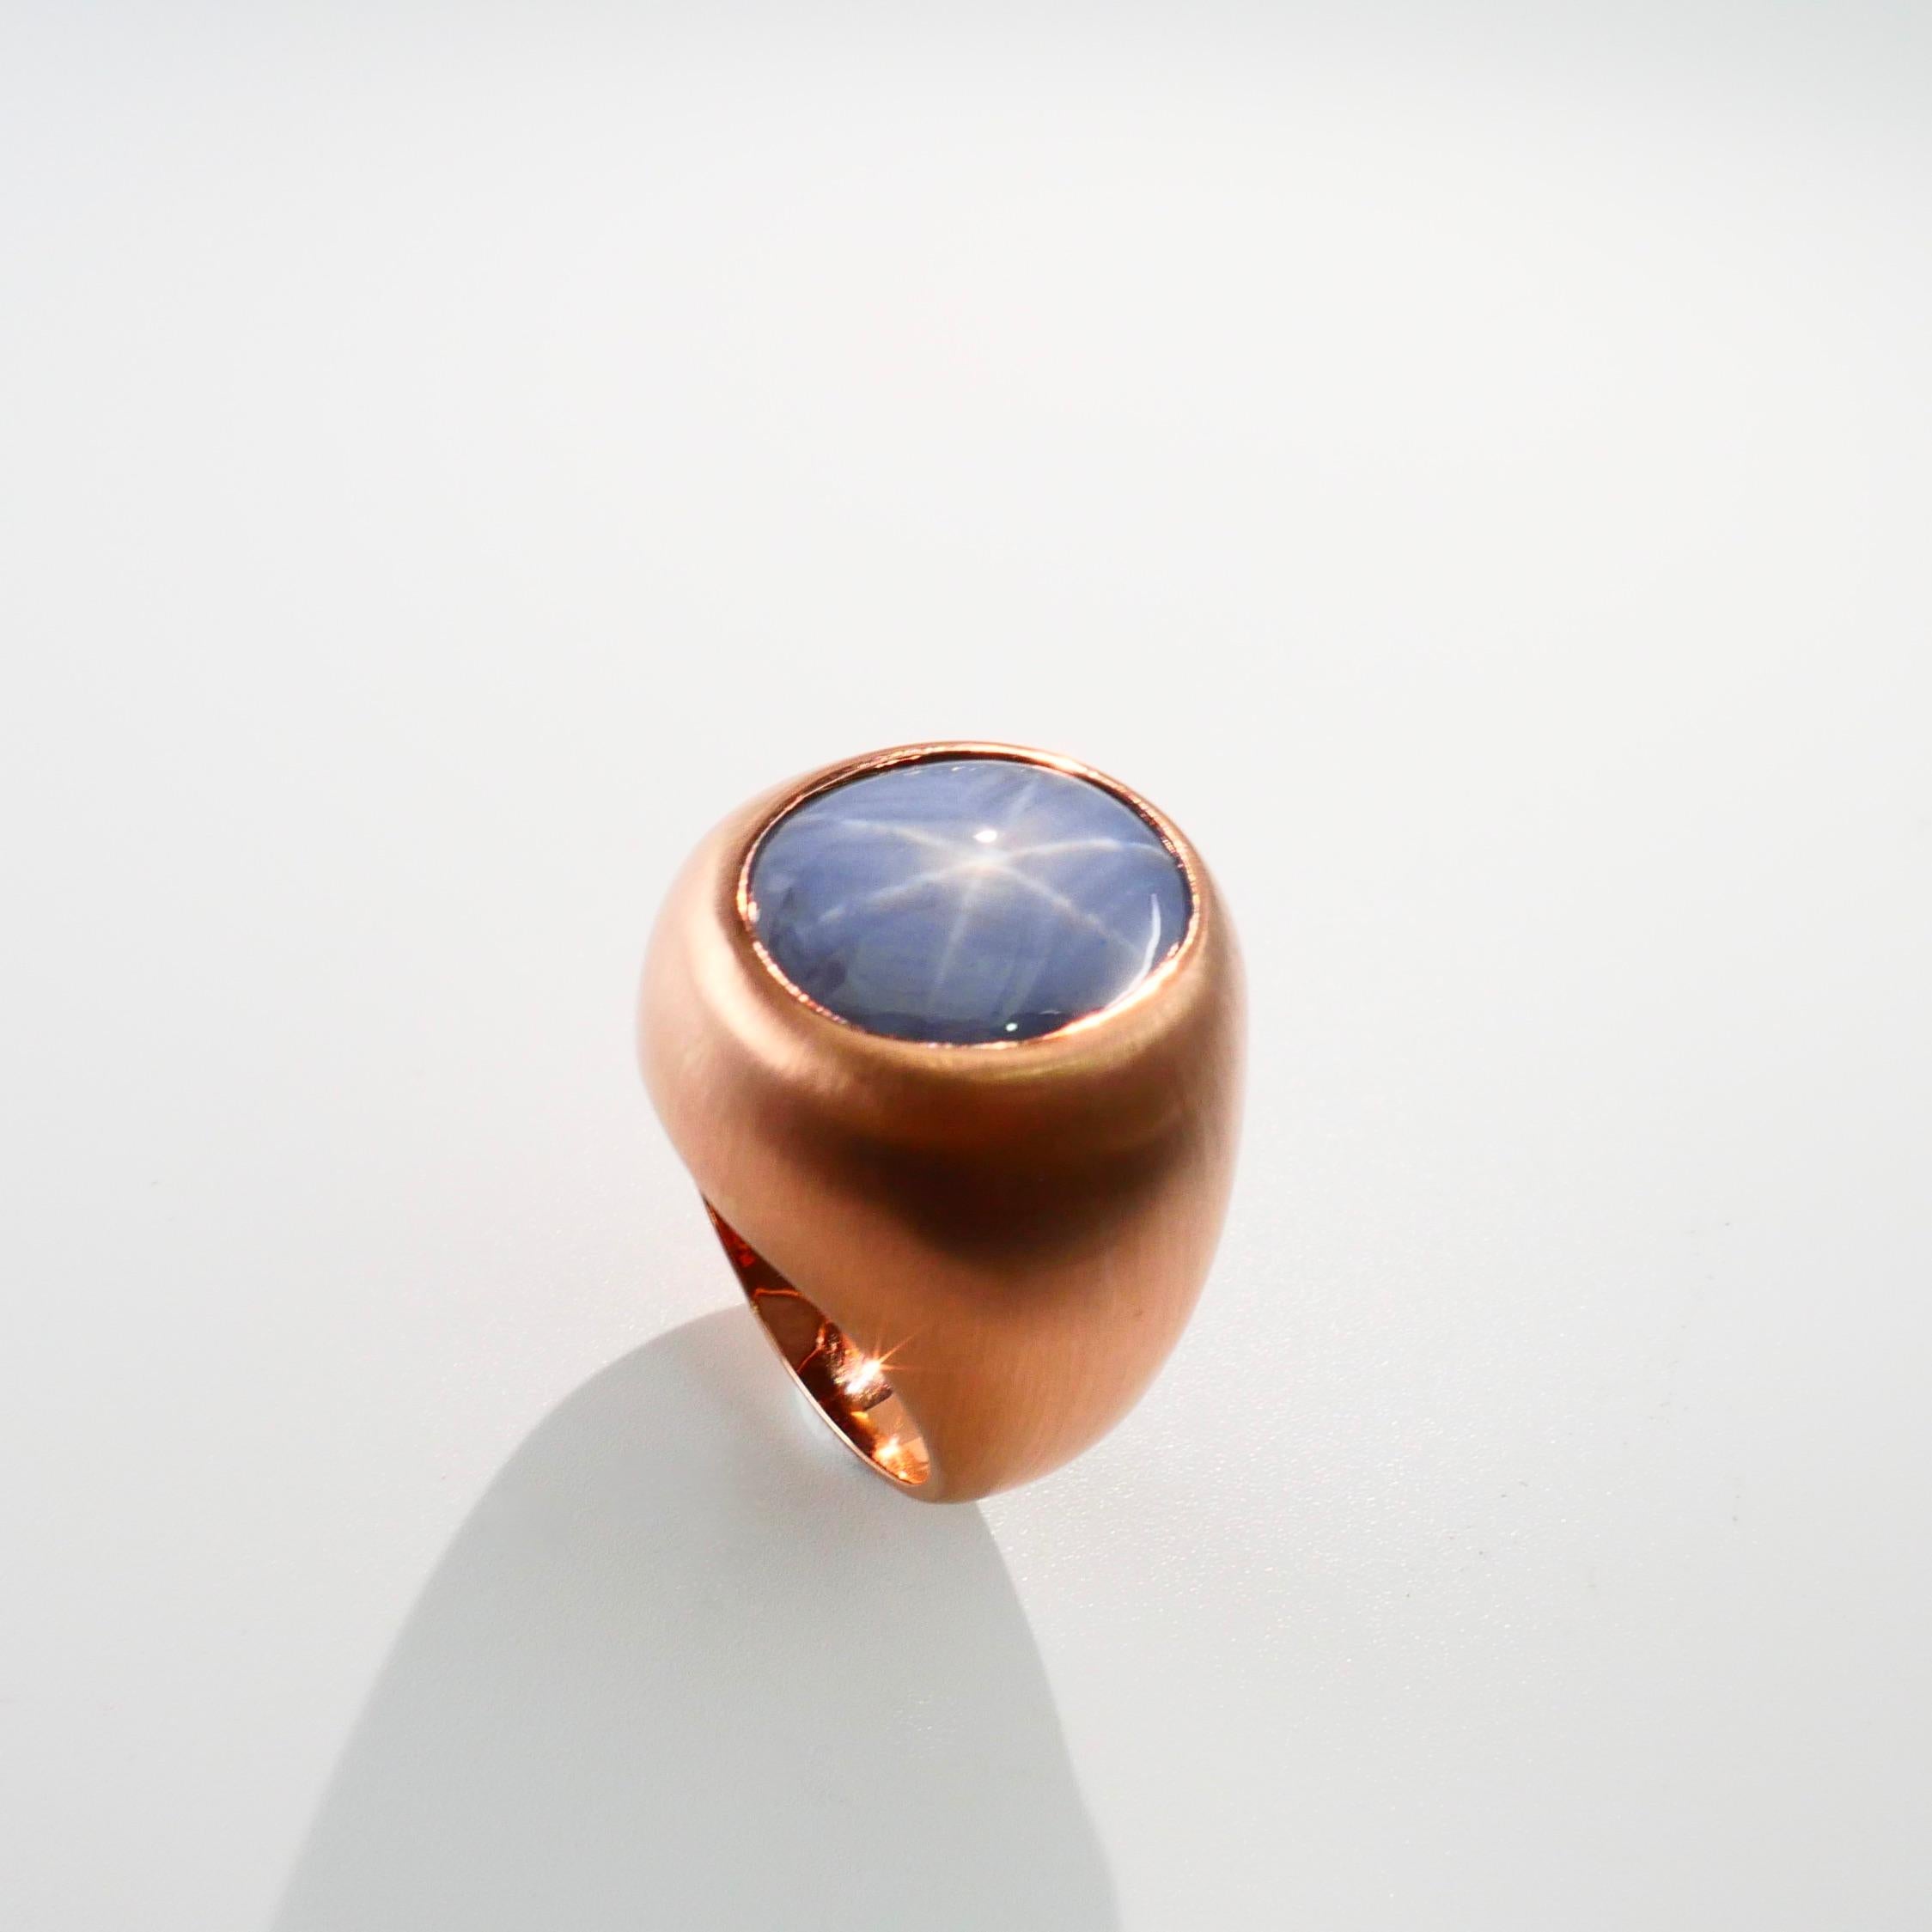 Oval Cut Certified Blue Star Sapphire 39.28 Carat Rose Gold Ring, Unisex, Strong Star